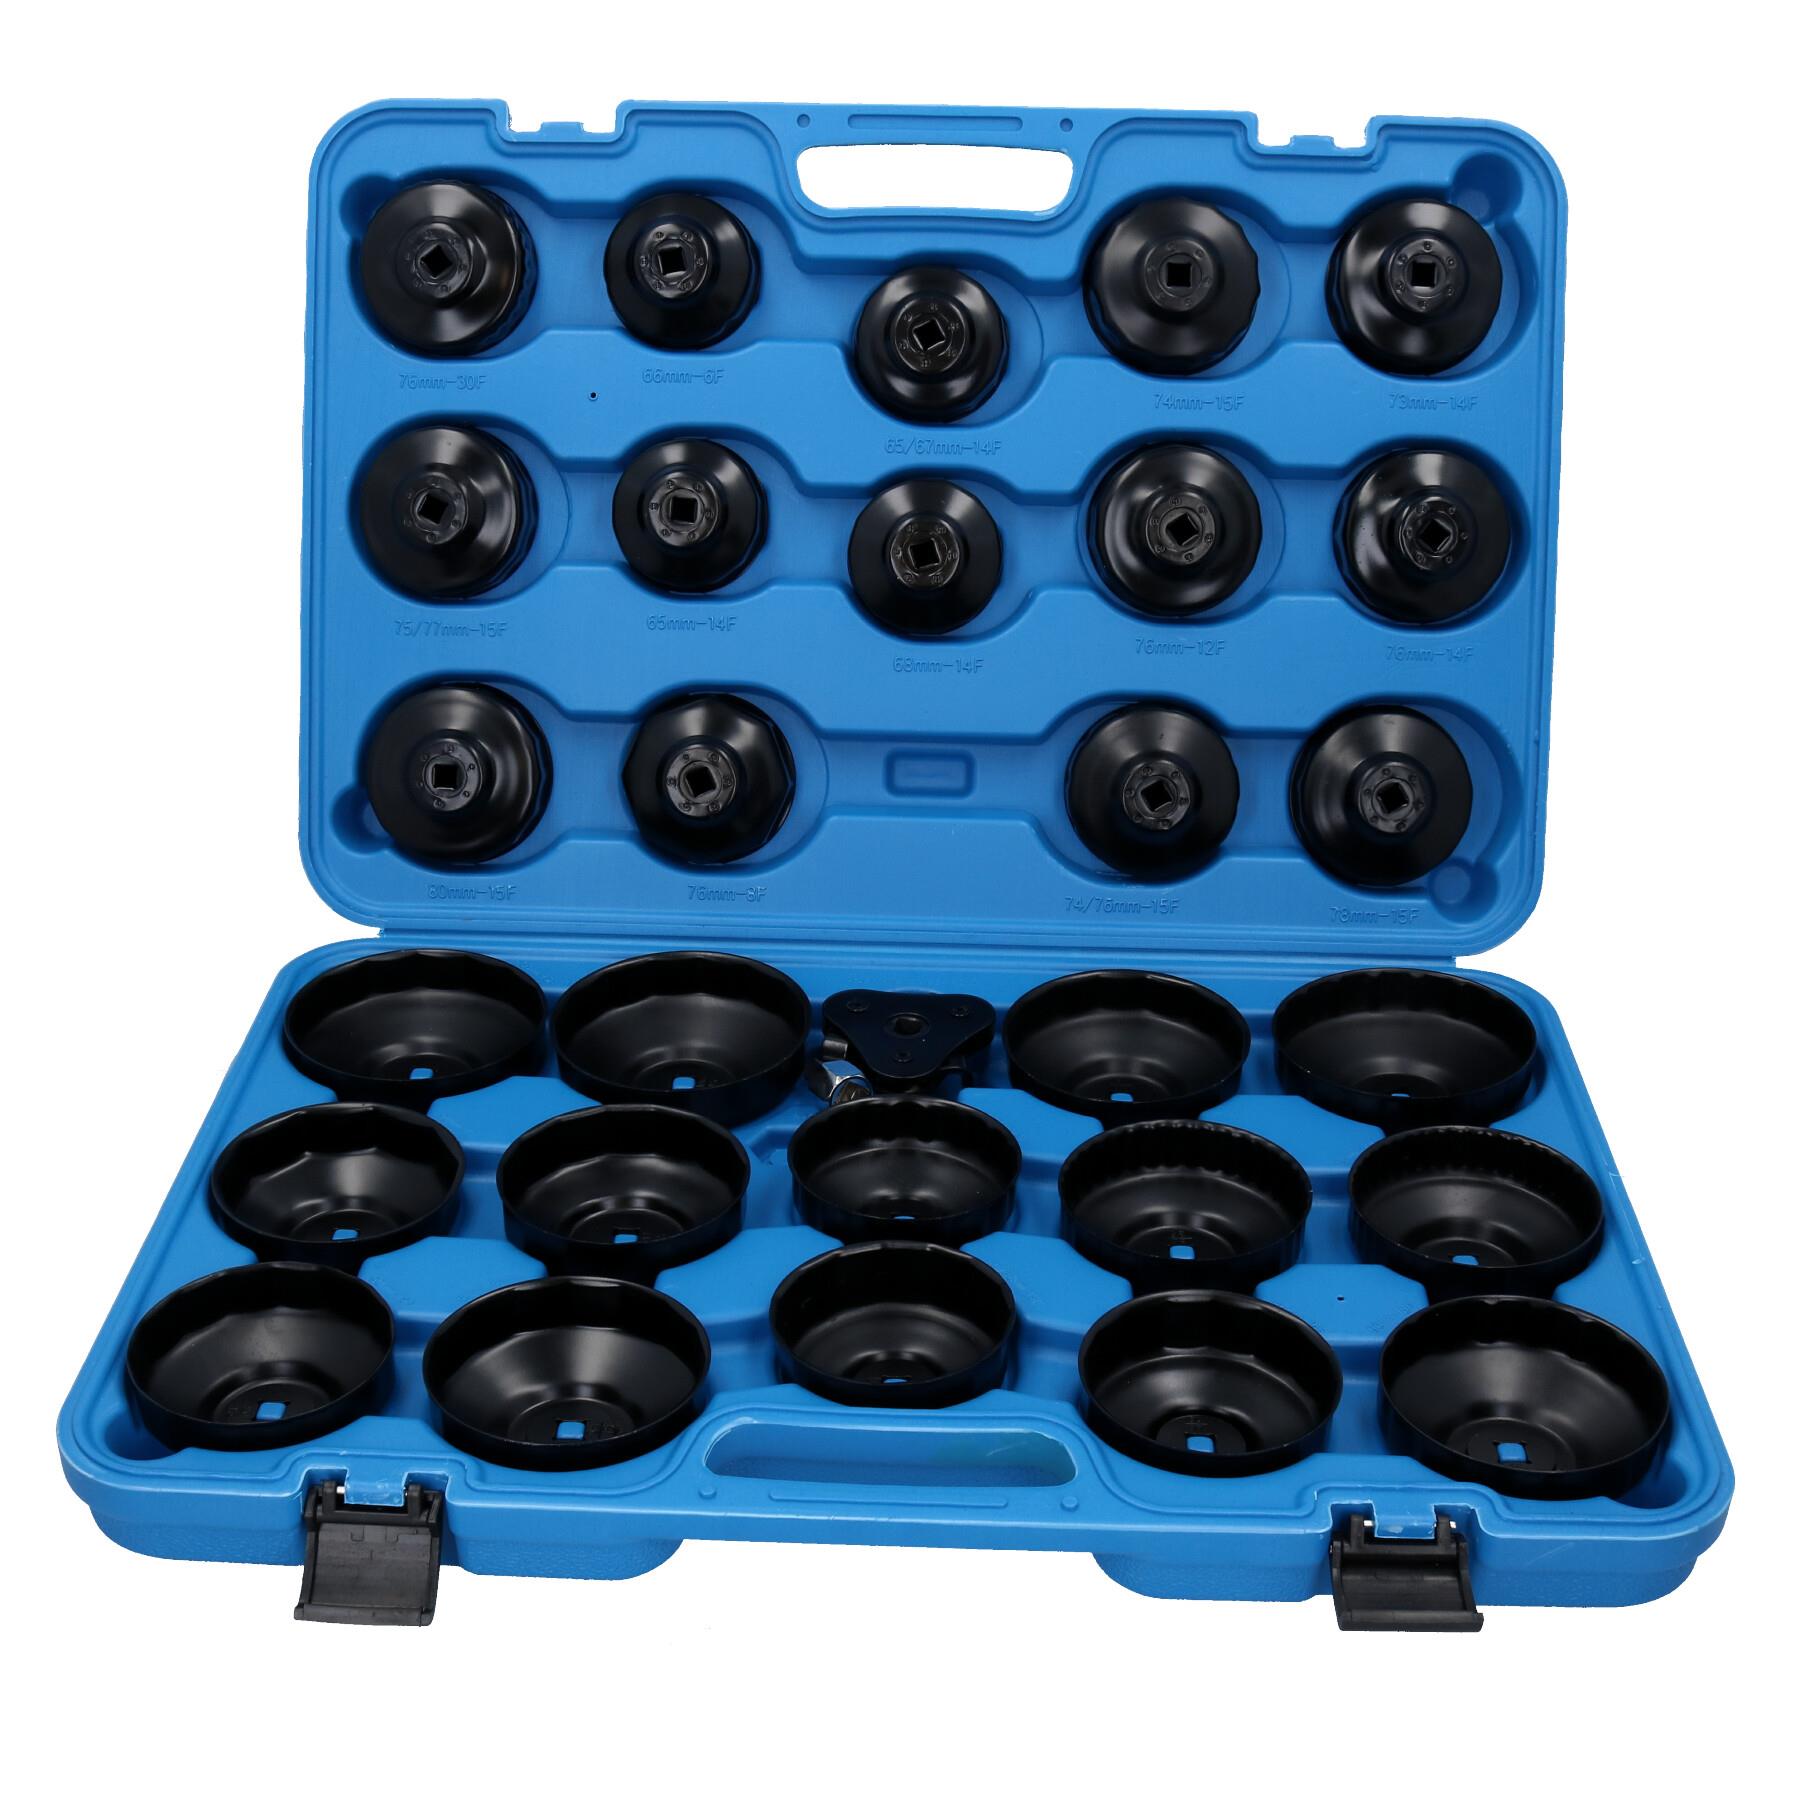 30pc Oil Filter Wrench Remover Installer Removal Sockets Cup Type 86 – 106mm